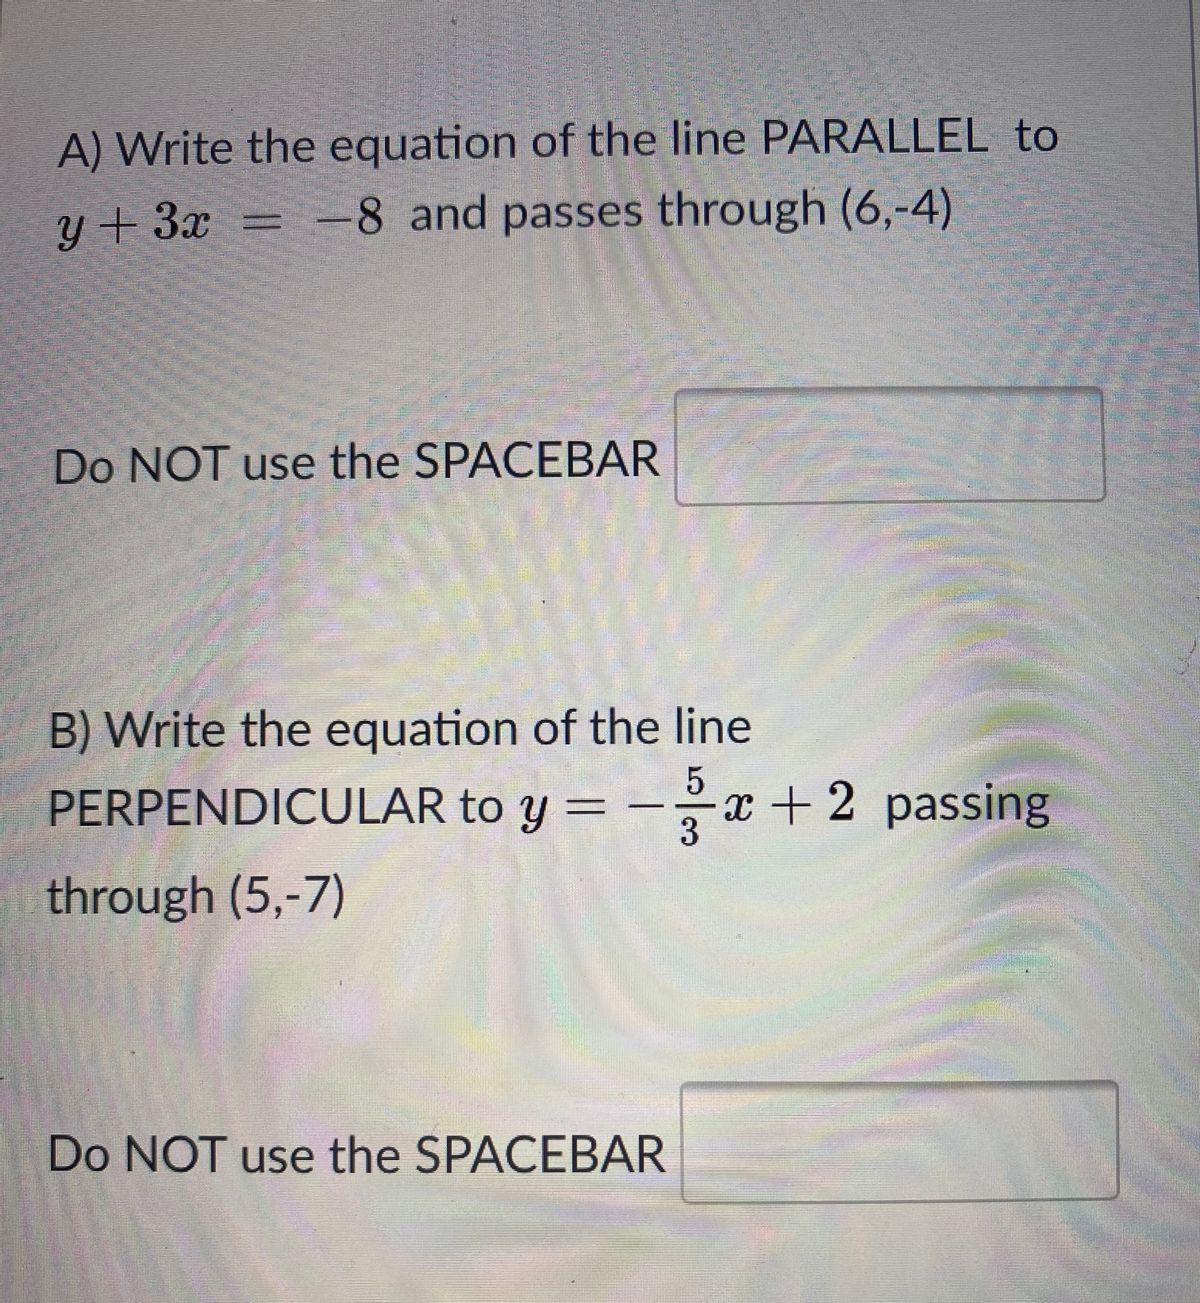 Answered: A) Write the equation of the line  bartleby